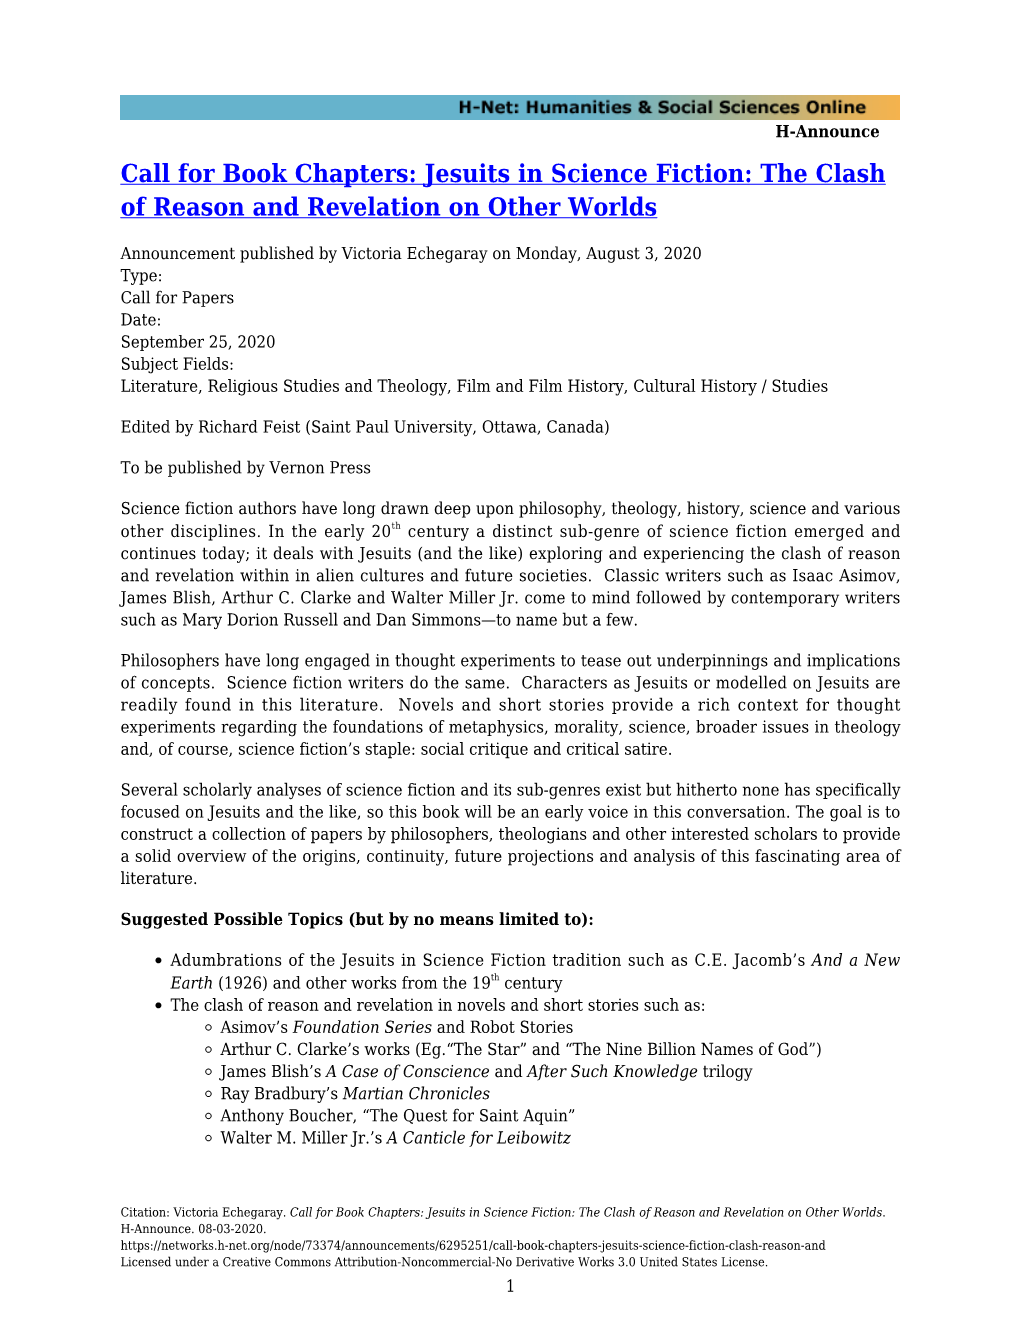 Call for Book Chapters: Jesuits in Science Fiction: the Clash of Reason and Revelation on Other Worlds